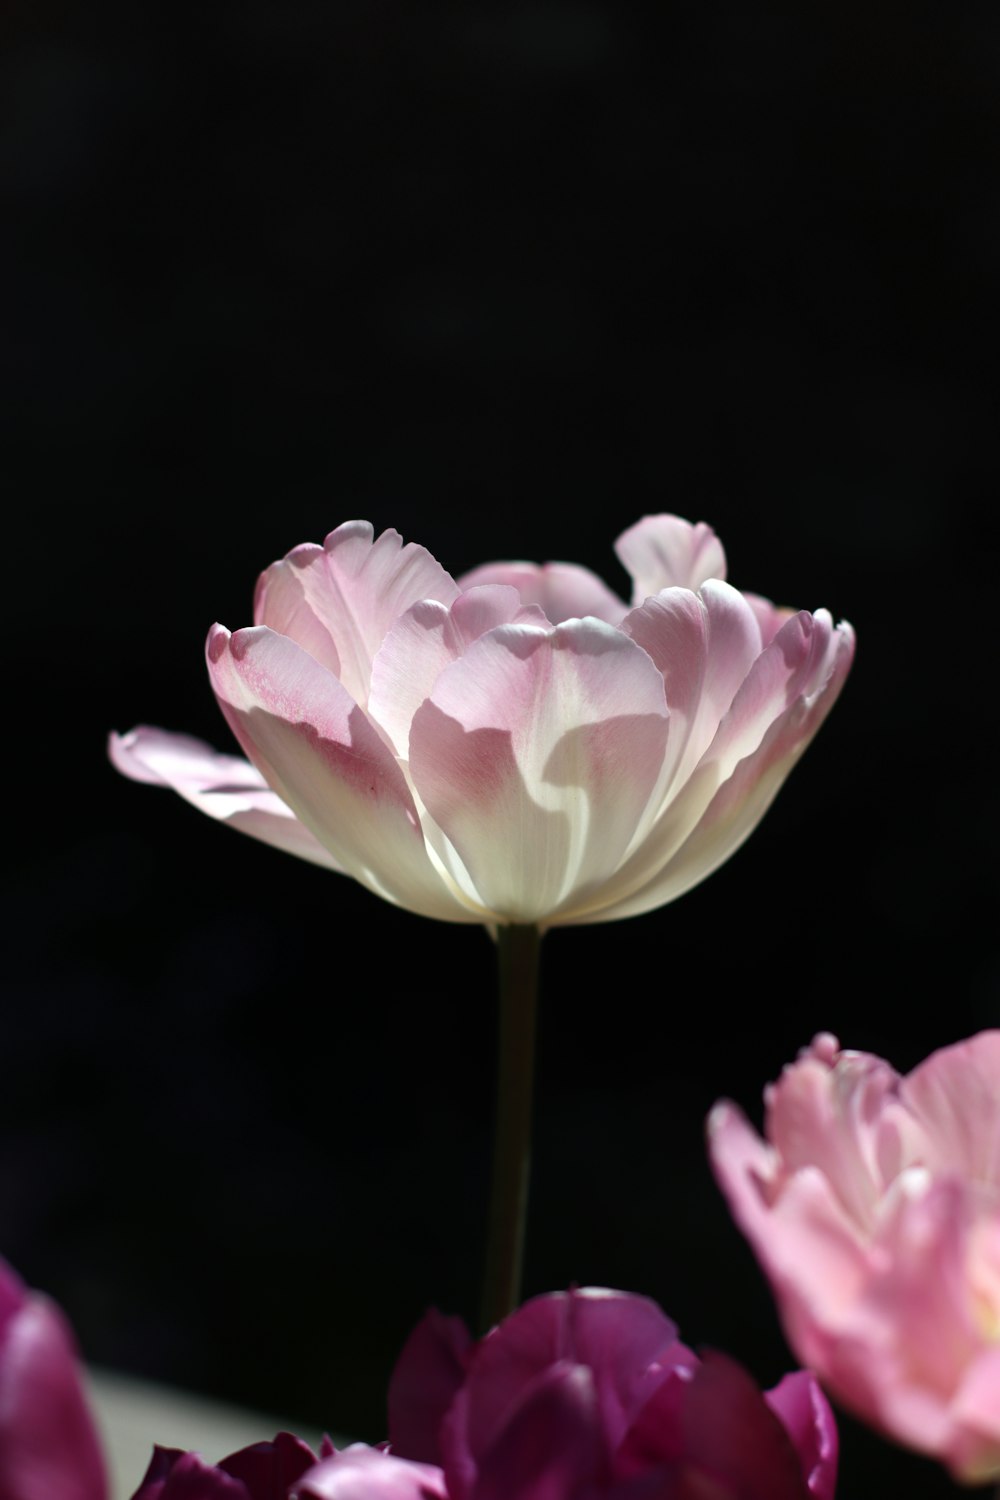 a group of pink and white flowers on a black background